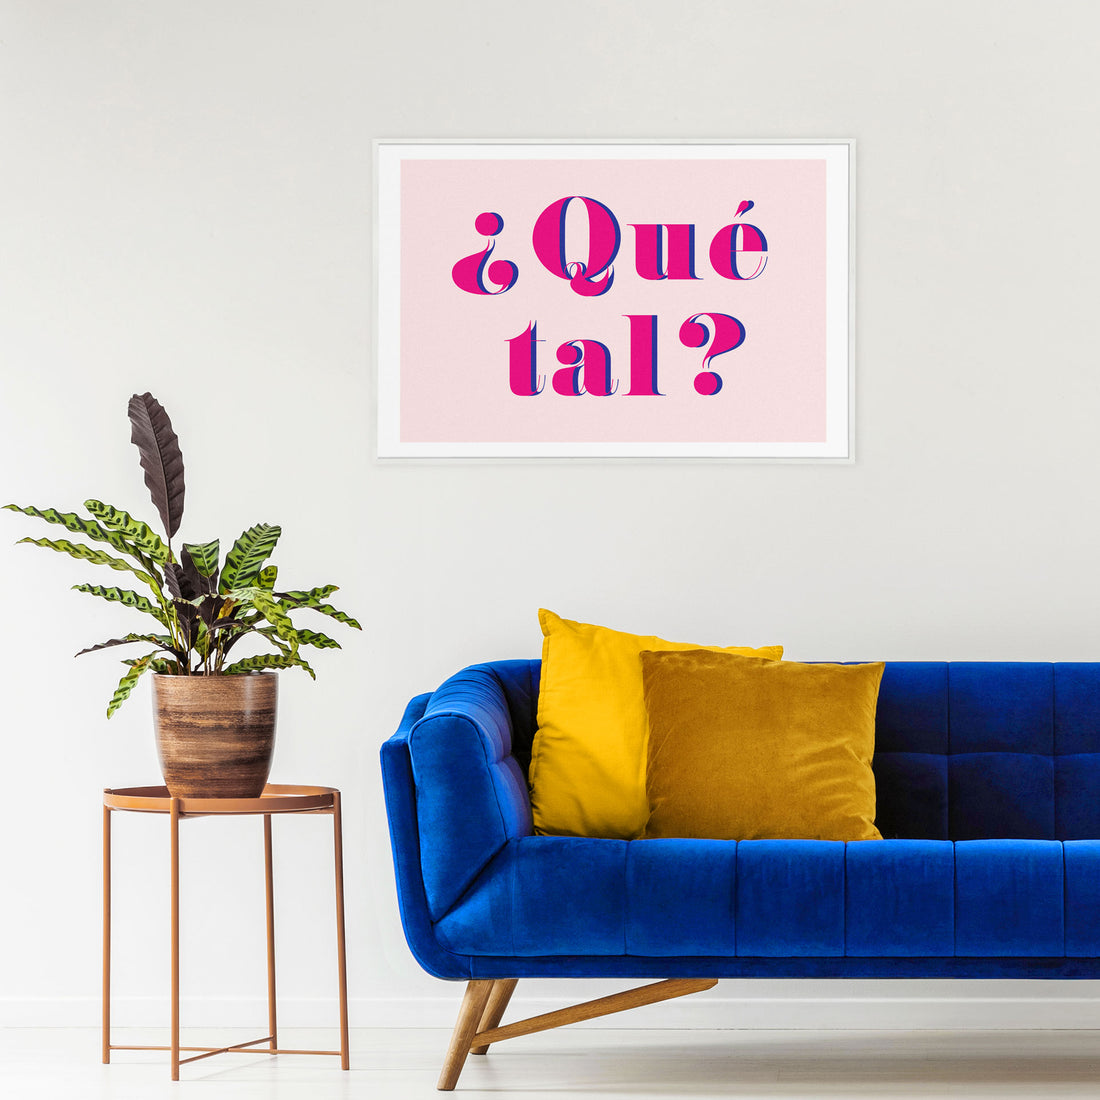 bright pink eclectic style spanish saying art poster